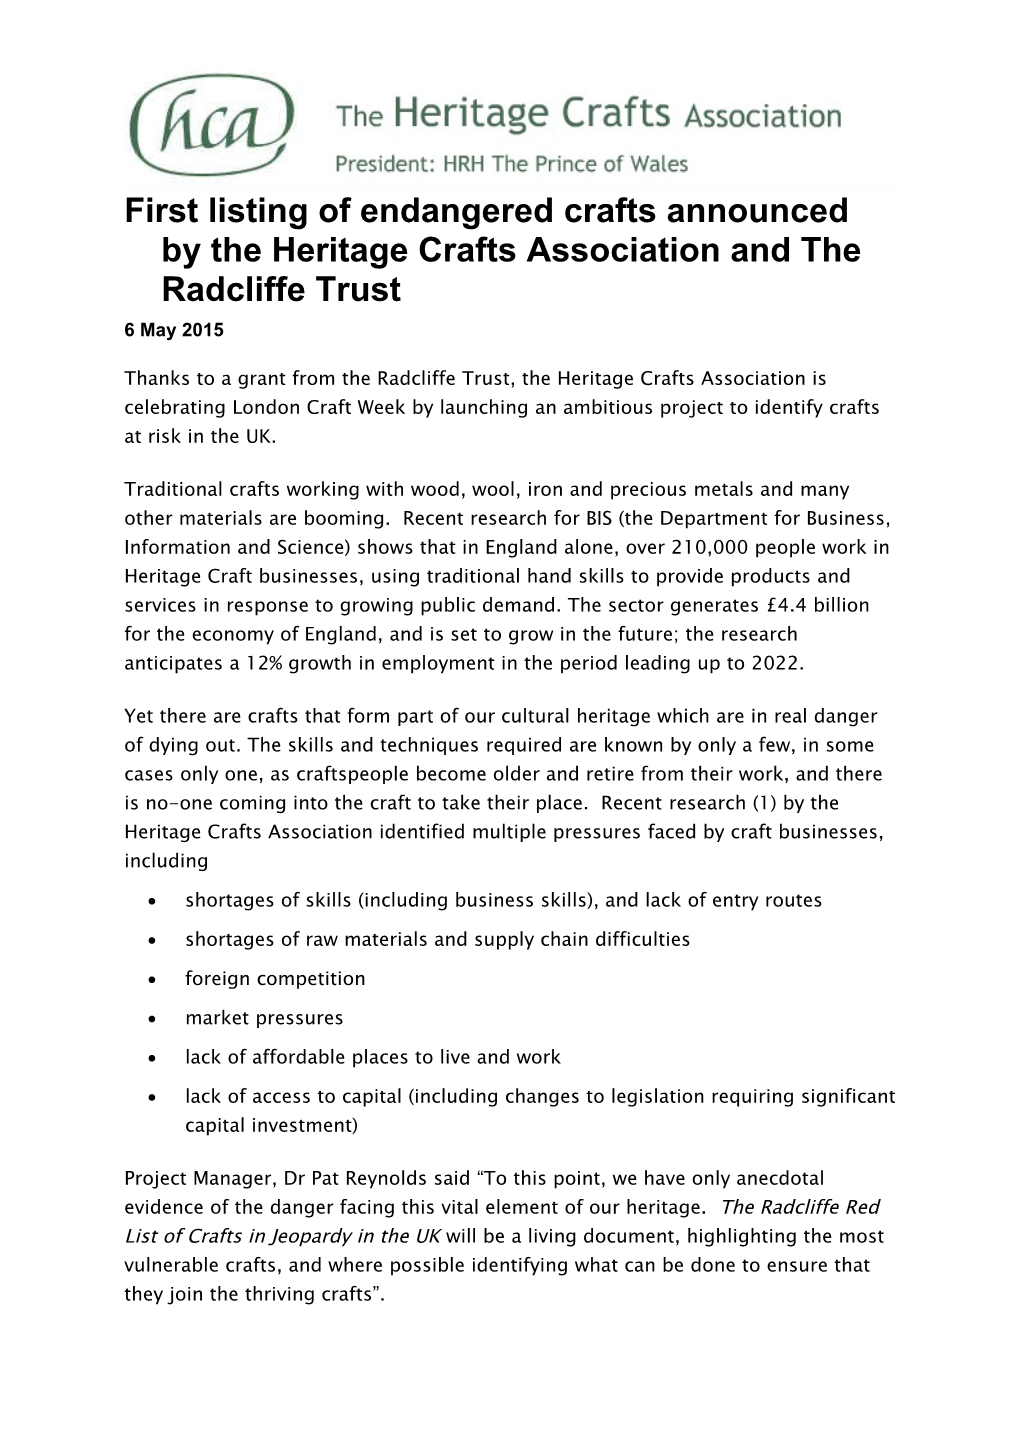 First Listing of Endangered Crafts Announced by the Heritage Crafts Association and The